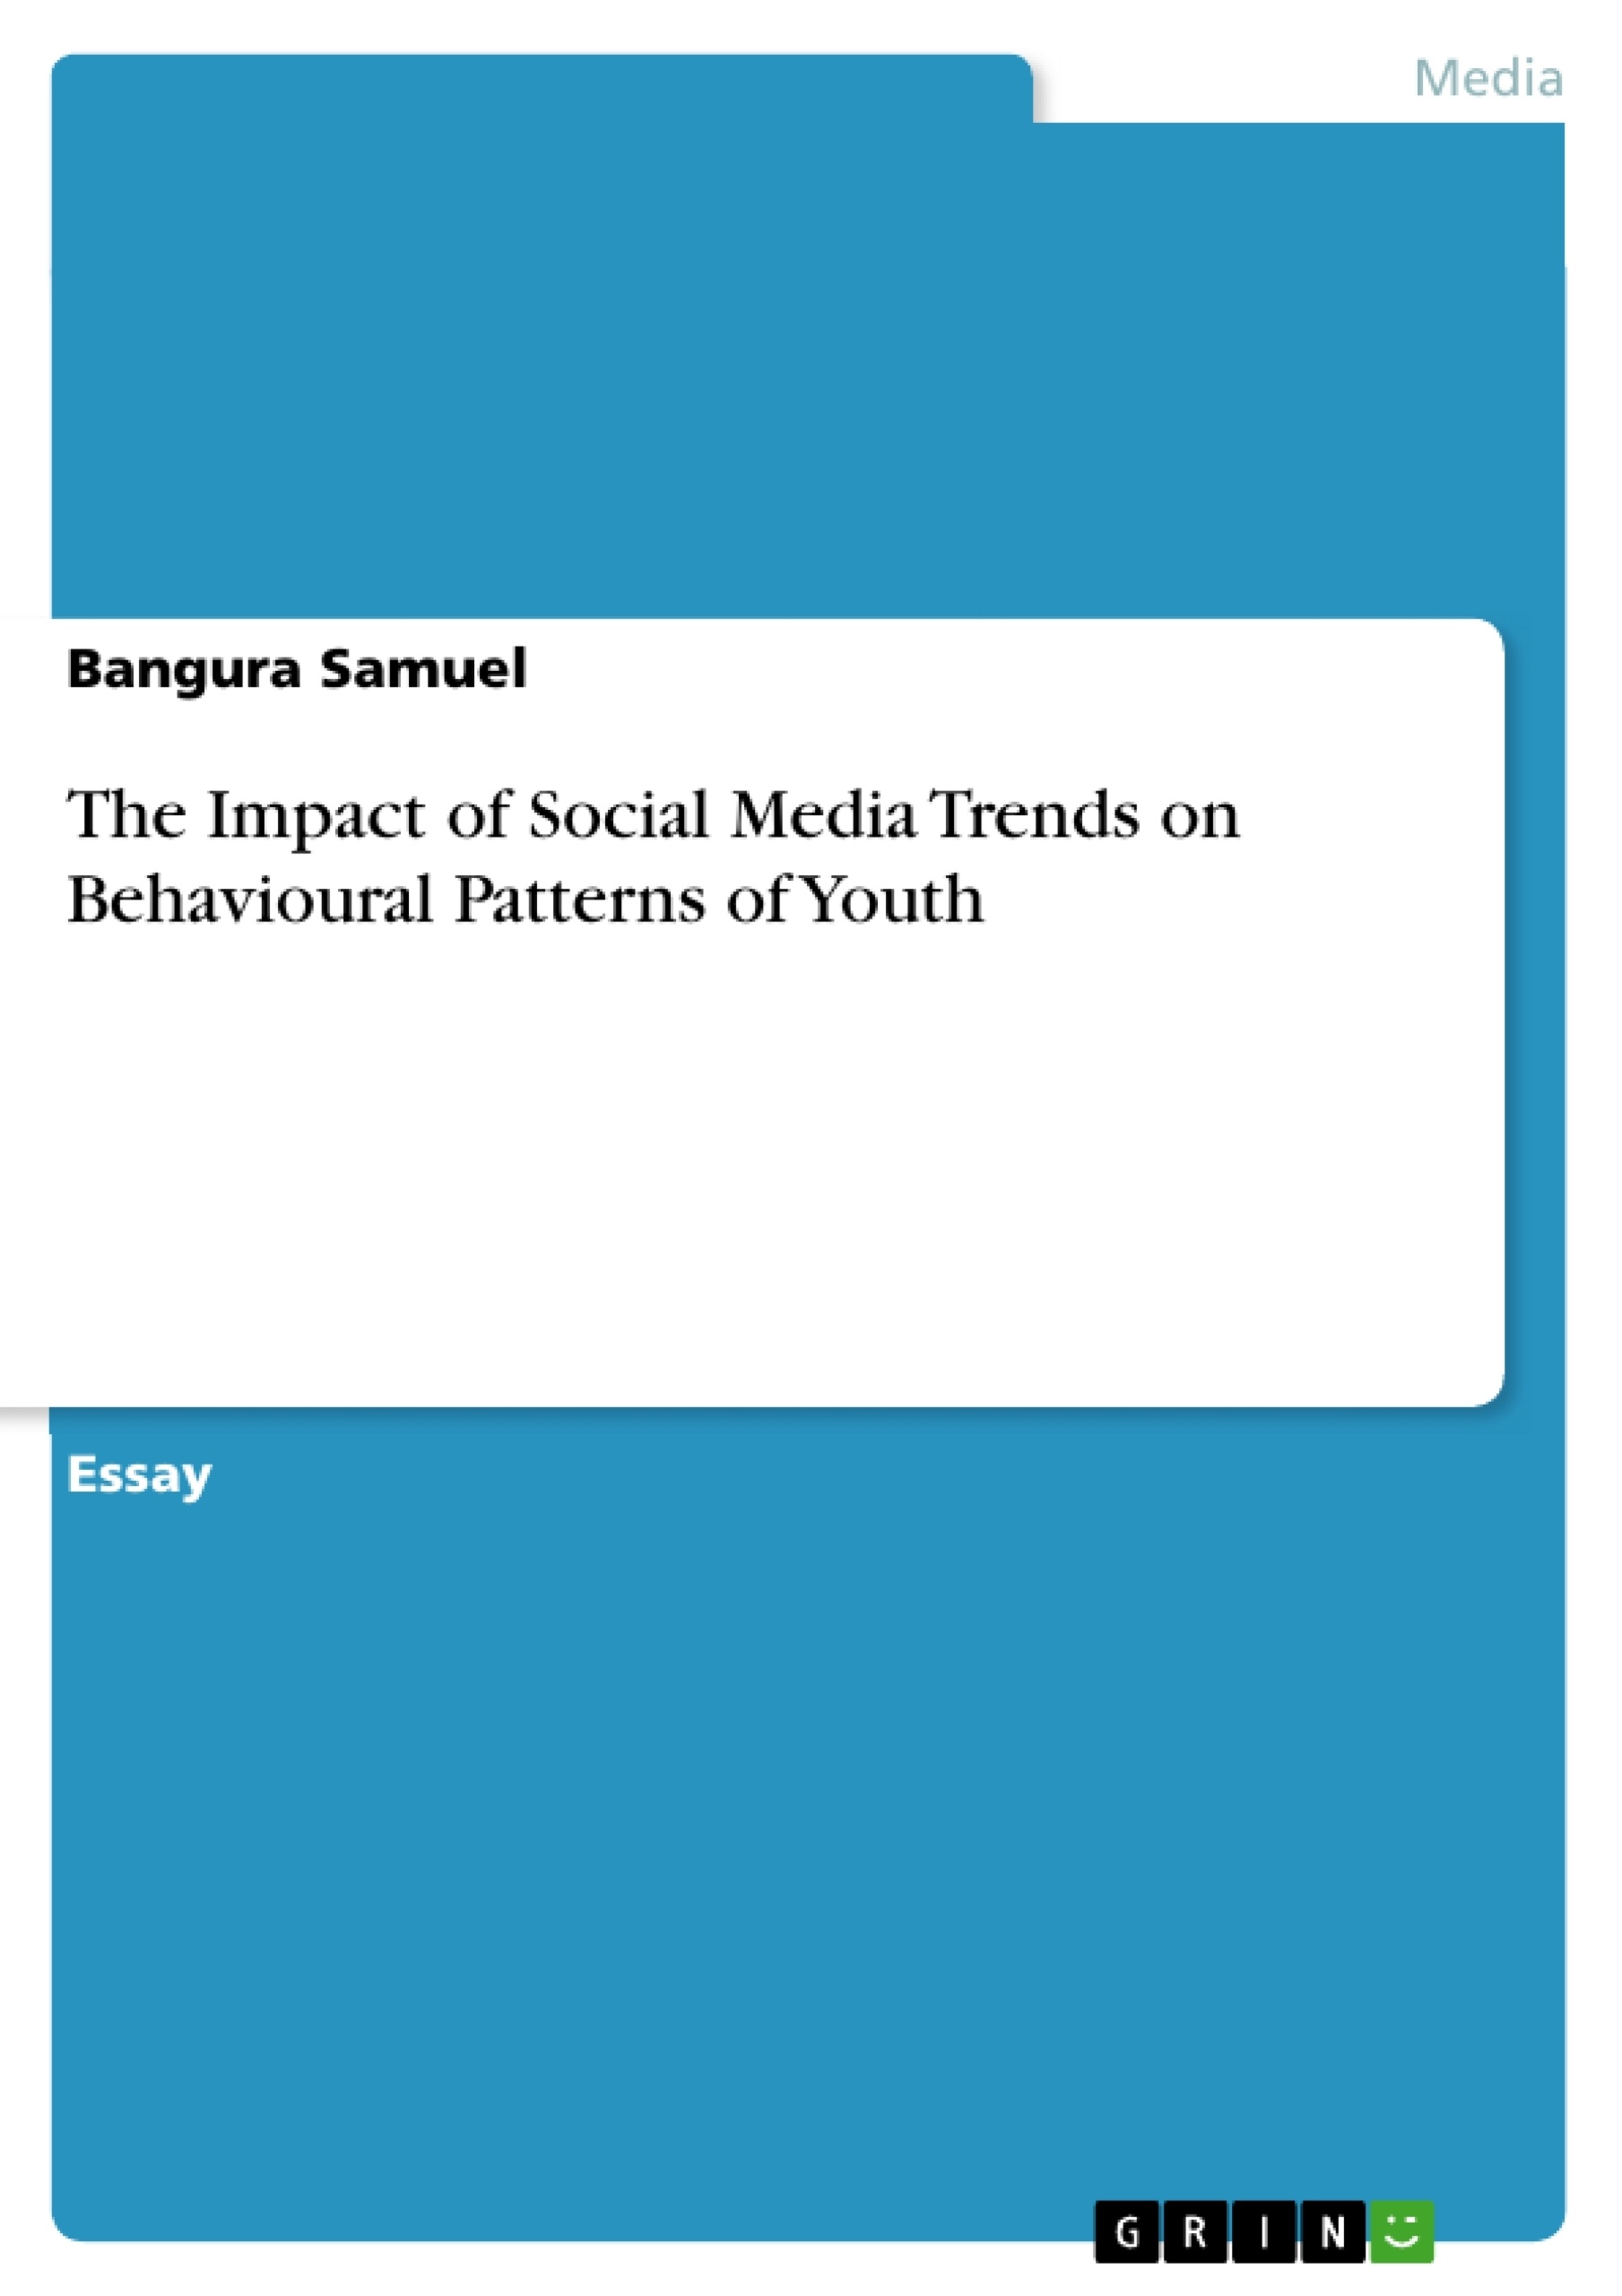 Title: The Impact of Social Media Trends on Behavioural Patterns of Youth